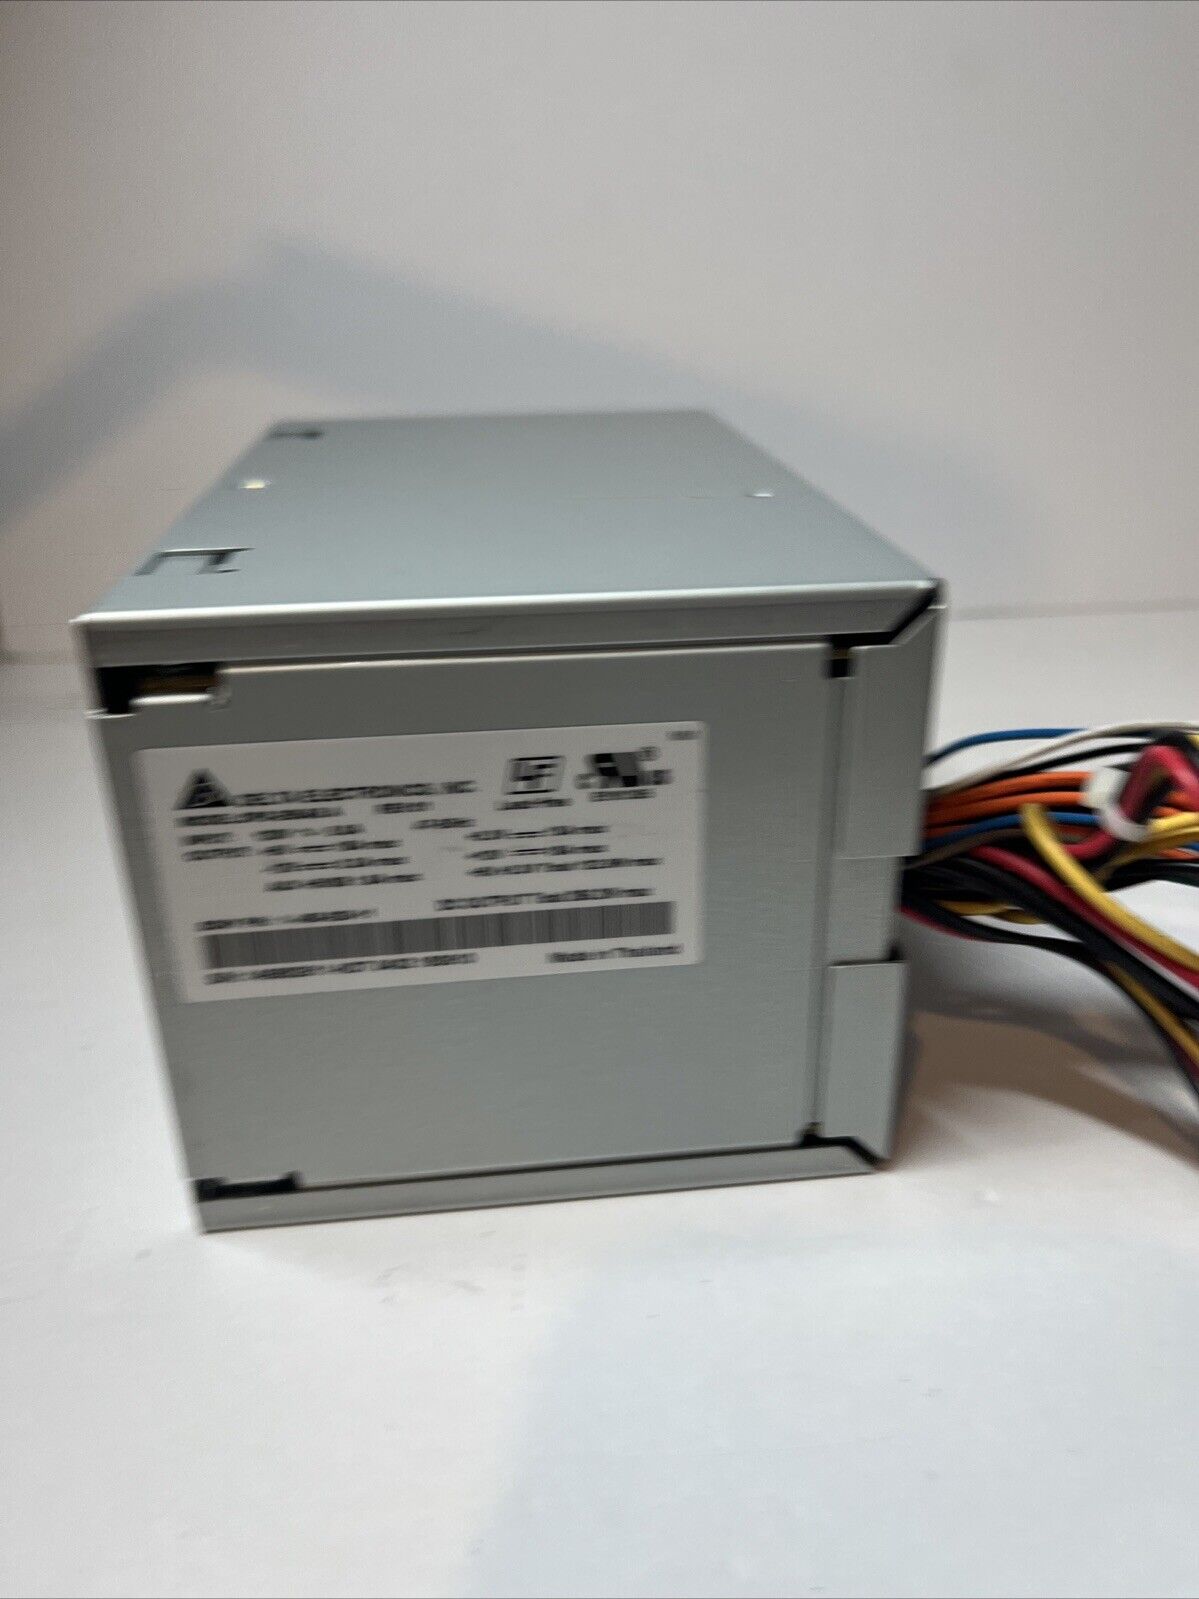 Delta Electronics 300W DPS-266AB-A P/N:1-48-825-11 Power Supply. Tested N Works